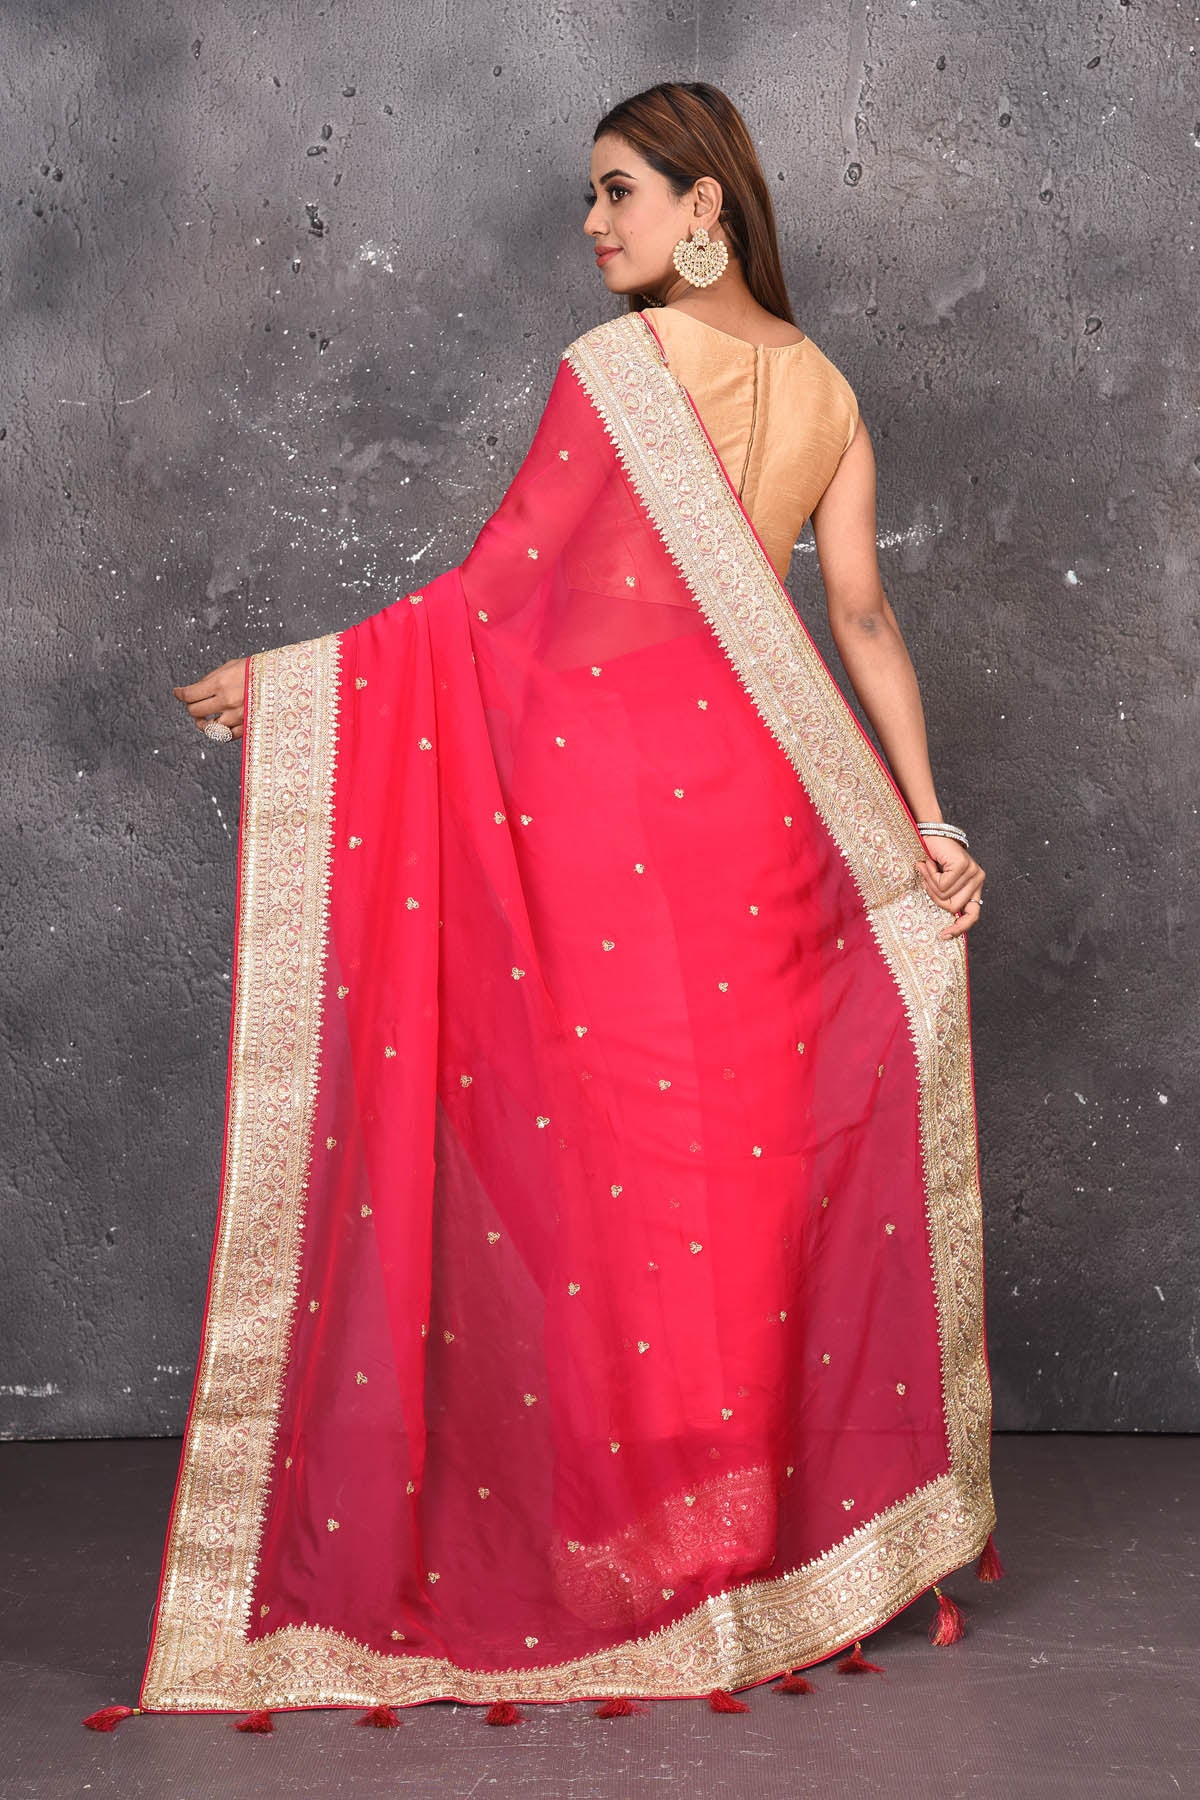 Shop exquisite pink georgette banarasi designer saree with golden heavy Border online in USA which has crafted by skilled weaver of Banaras with elegance and grace, this saree is definitely the epitome of beauty and a must have in your collection. Buy designer handwoven banarasi georgette sari with any blouse from Pure Elegance Indian saree store in USA.-Back view with open pallu.